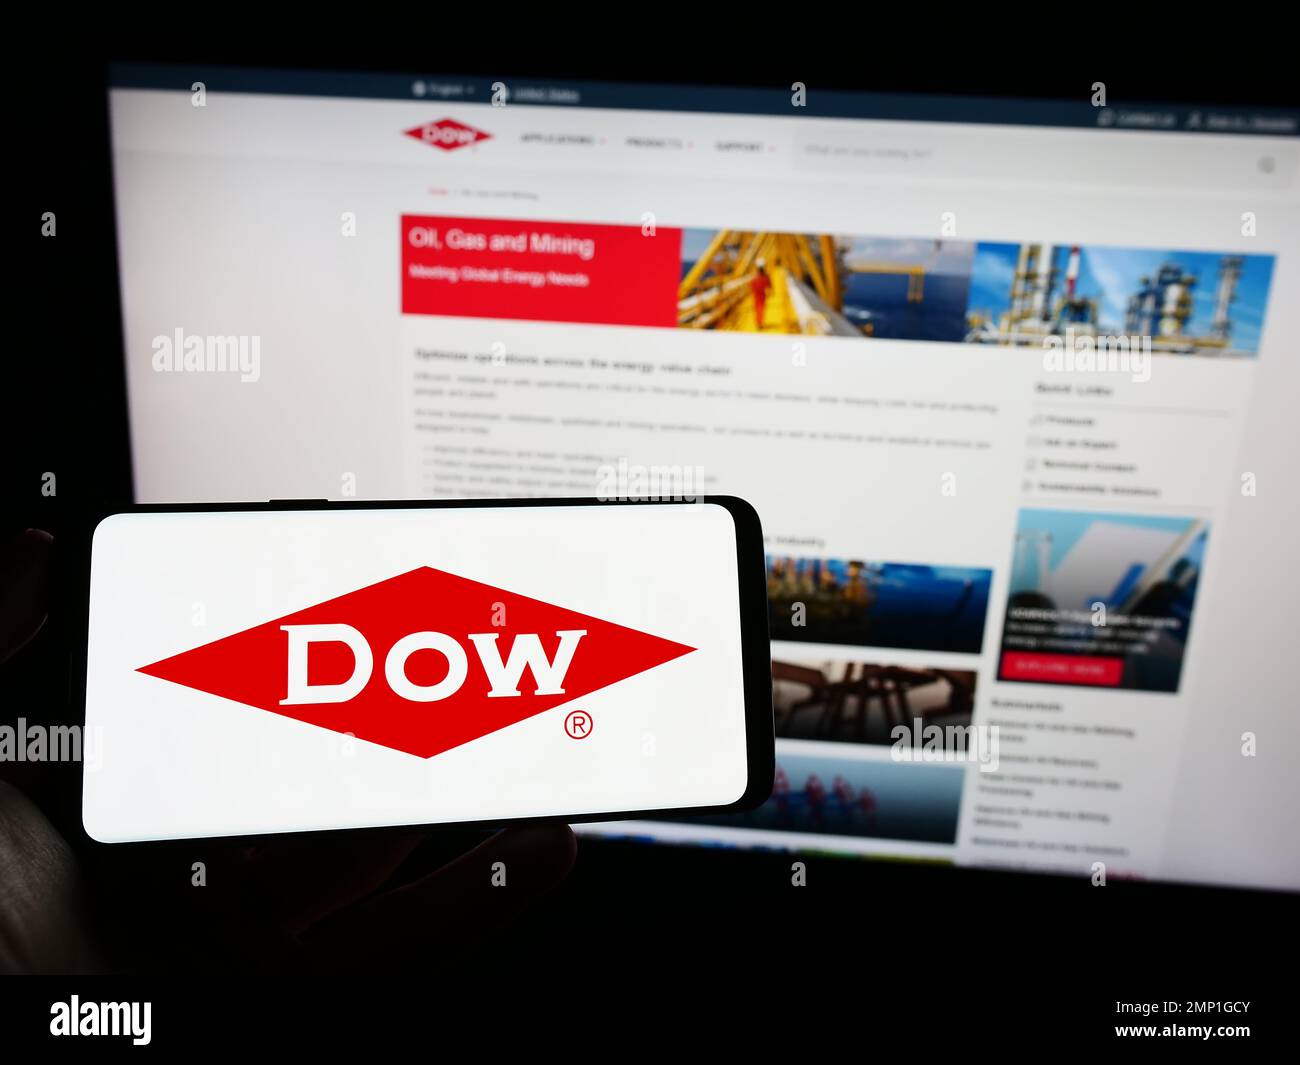 Person holding smartphone with logo of US chemical company Dow Inc. on screen in front of website. Focus on phone display. Stock Photo